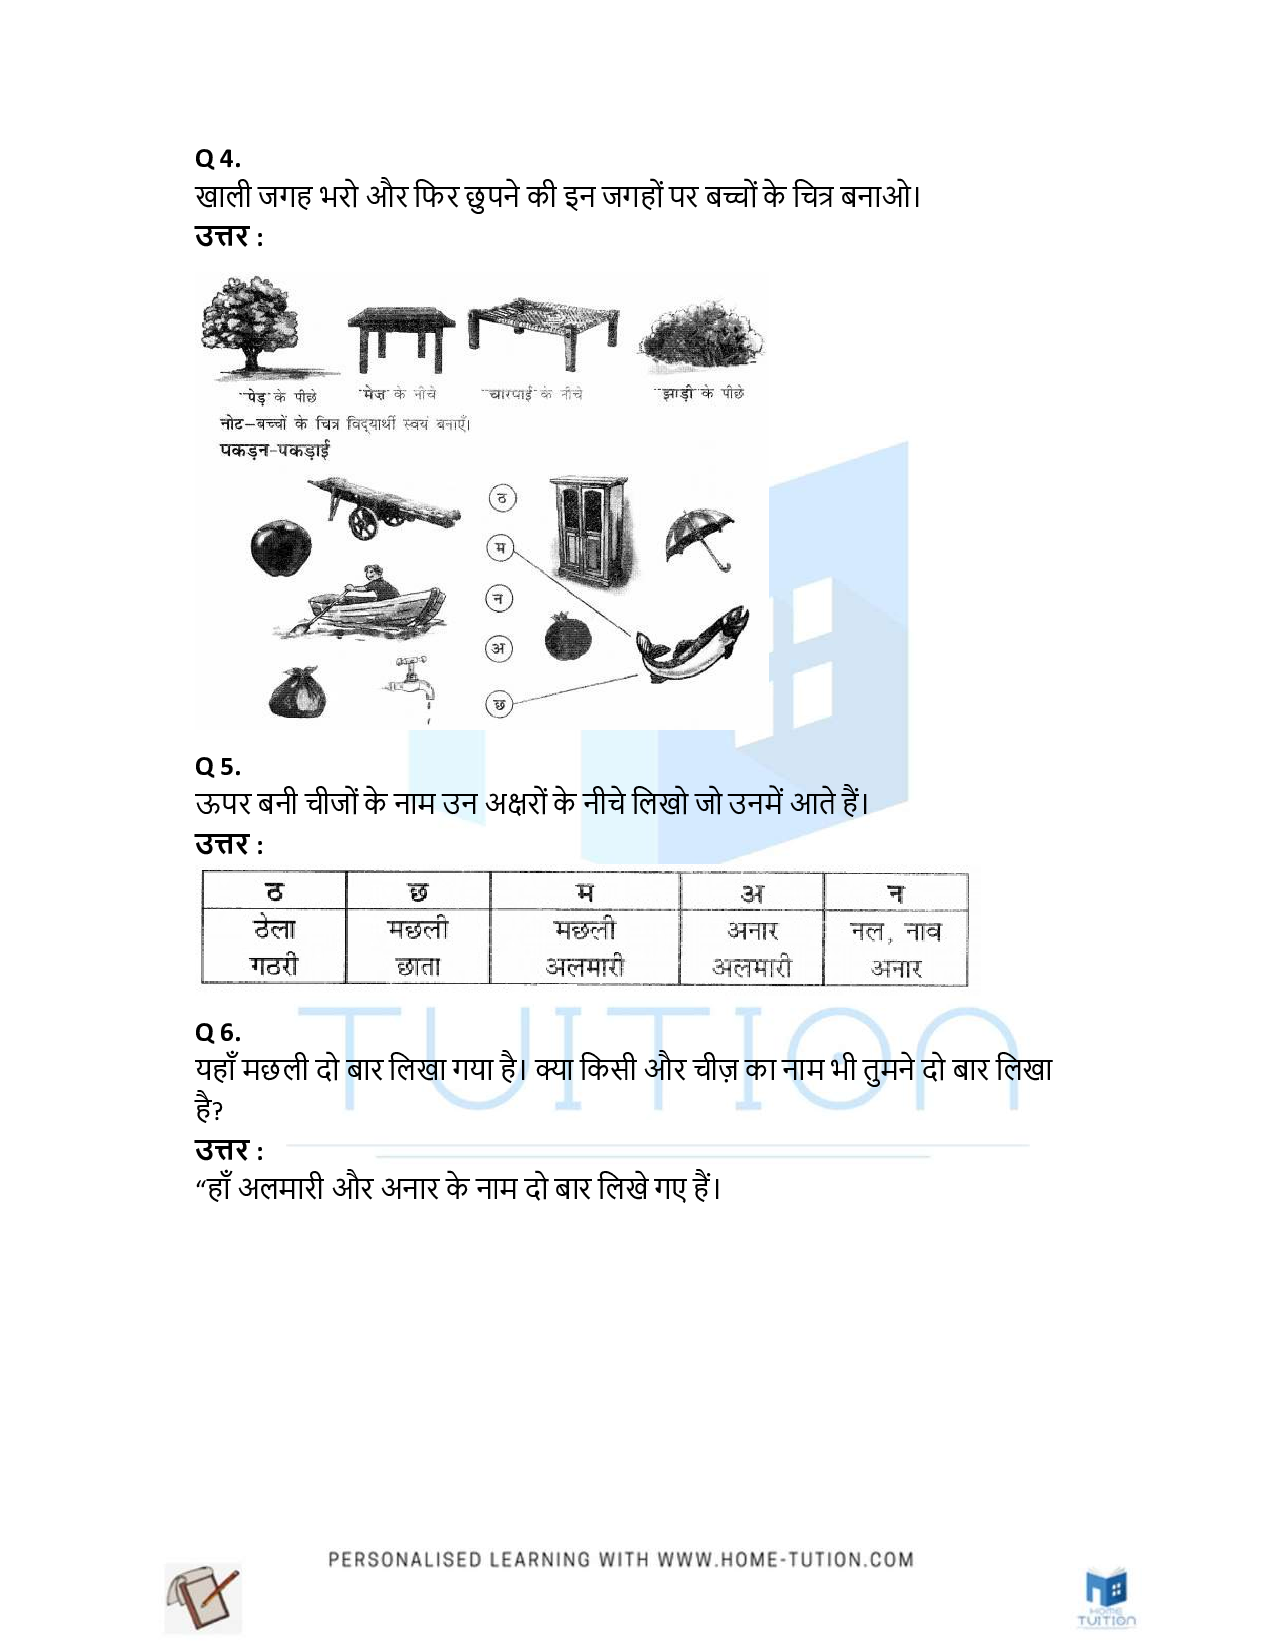 NCERT Solution for Class 1 Hindi Chapter 1 Jhula (झूला)